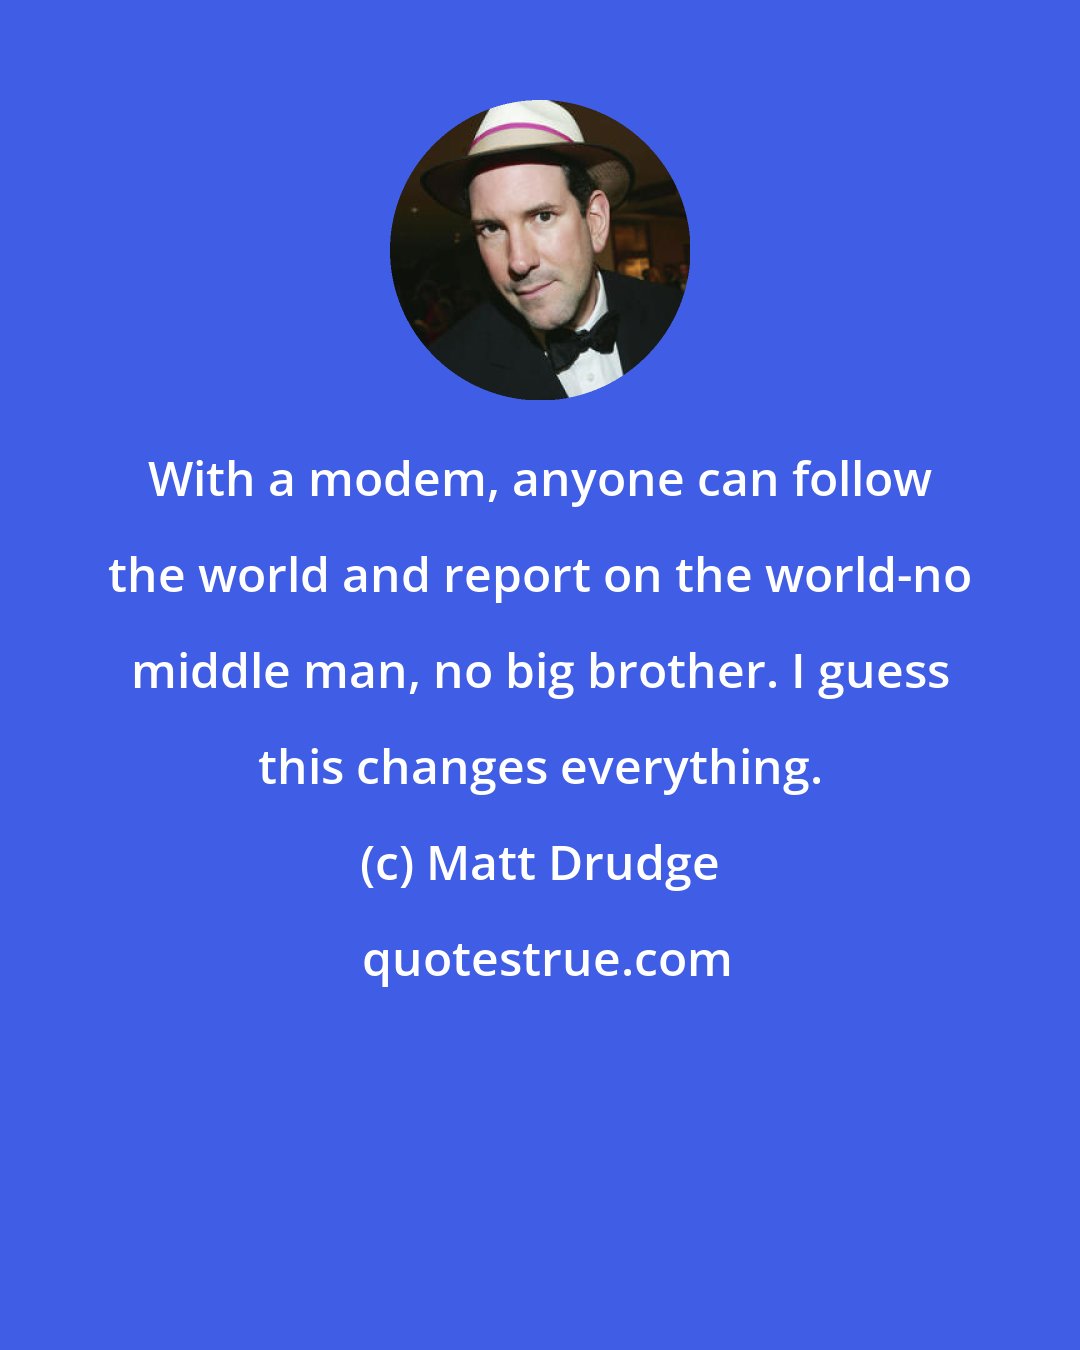 Matt Drudge: With a modem, anyone can follow the world and report on the world-no middle man, no big brother. I guess this changes everything.